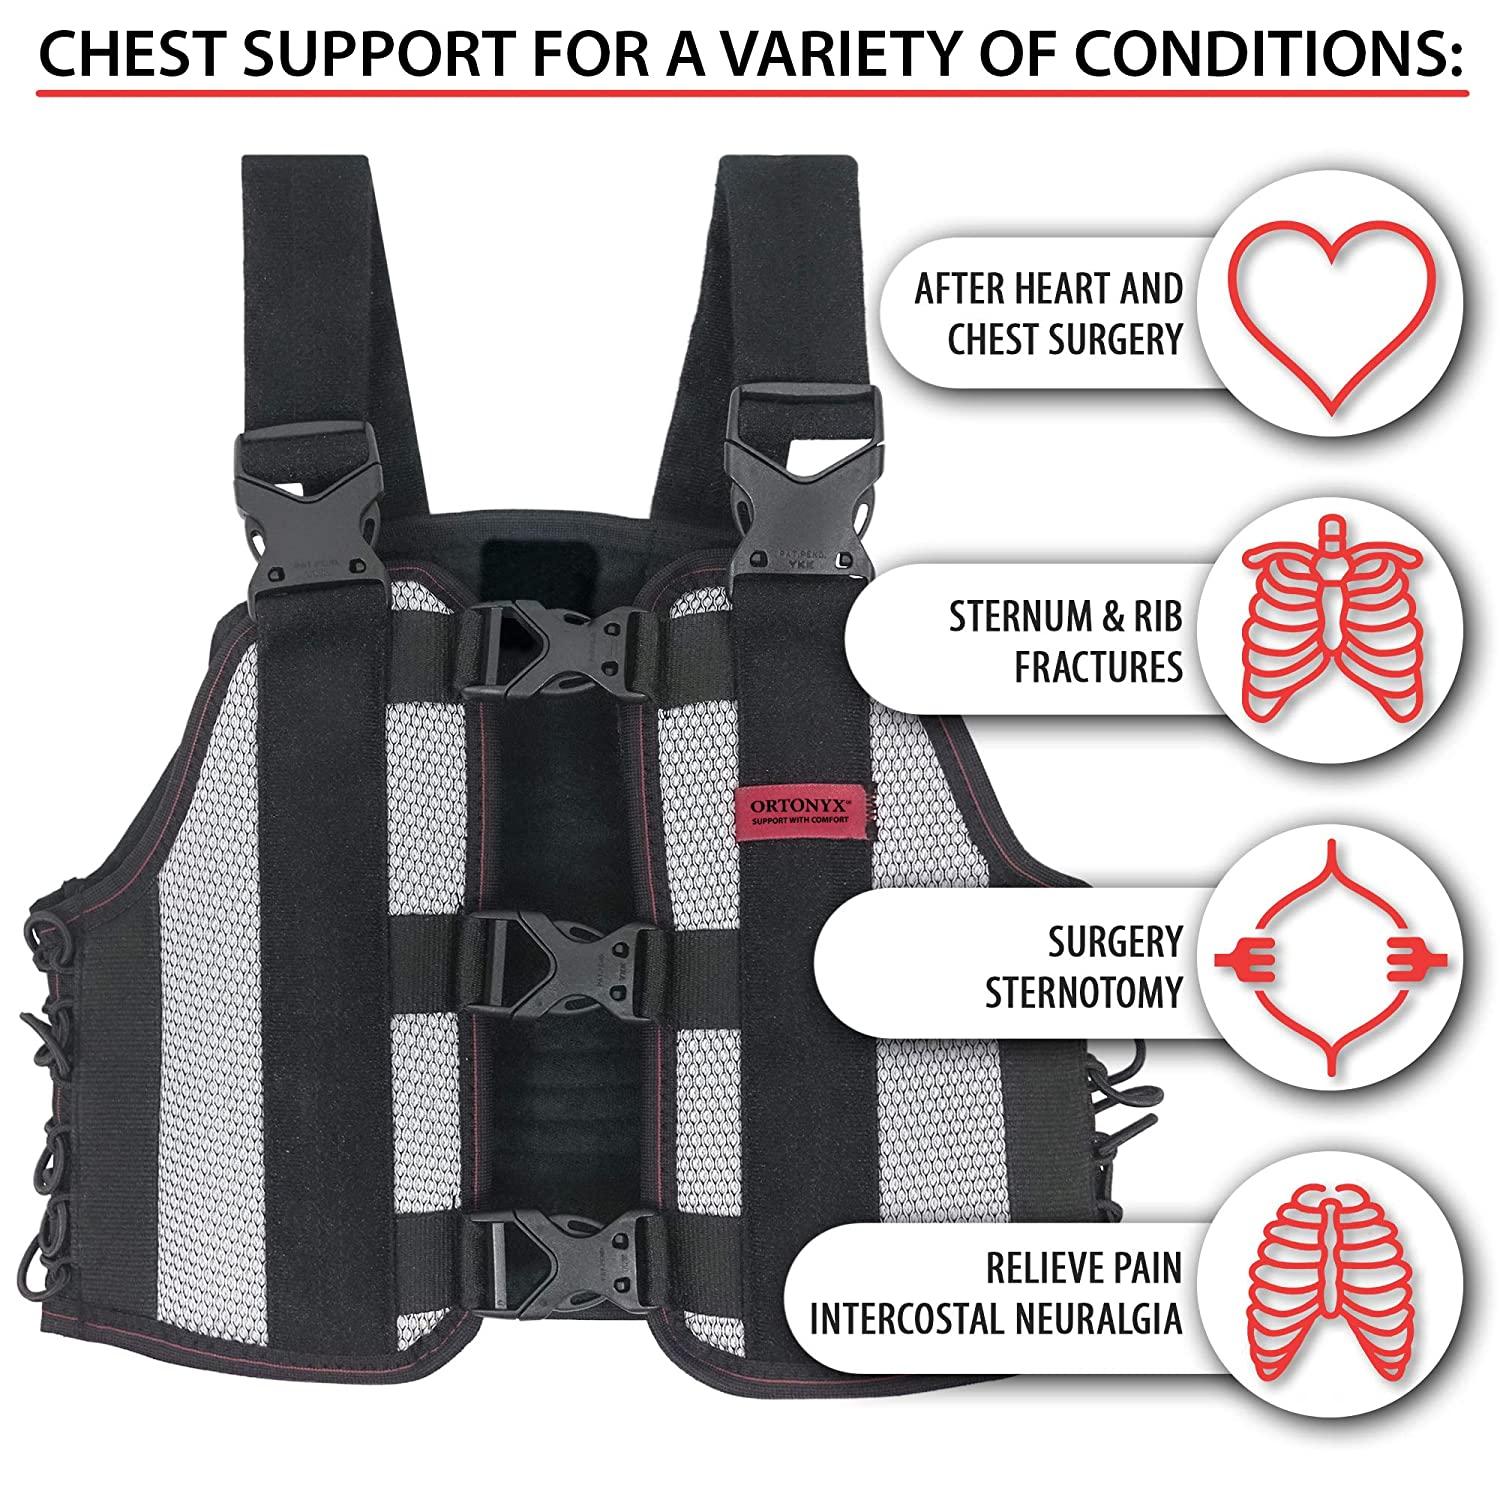 ORTONYX Sternum and Thorax Support Chest Brace / ACHB5255-L Large (Pack of  1) Black/Gray